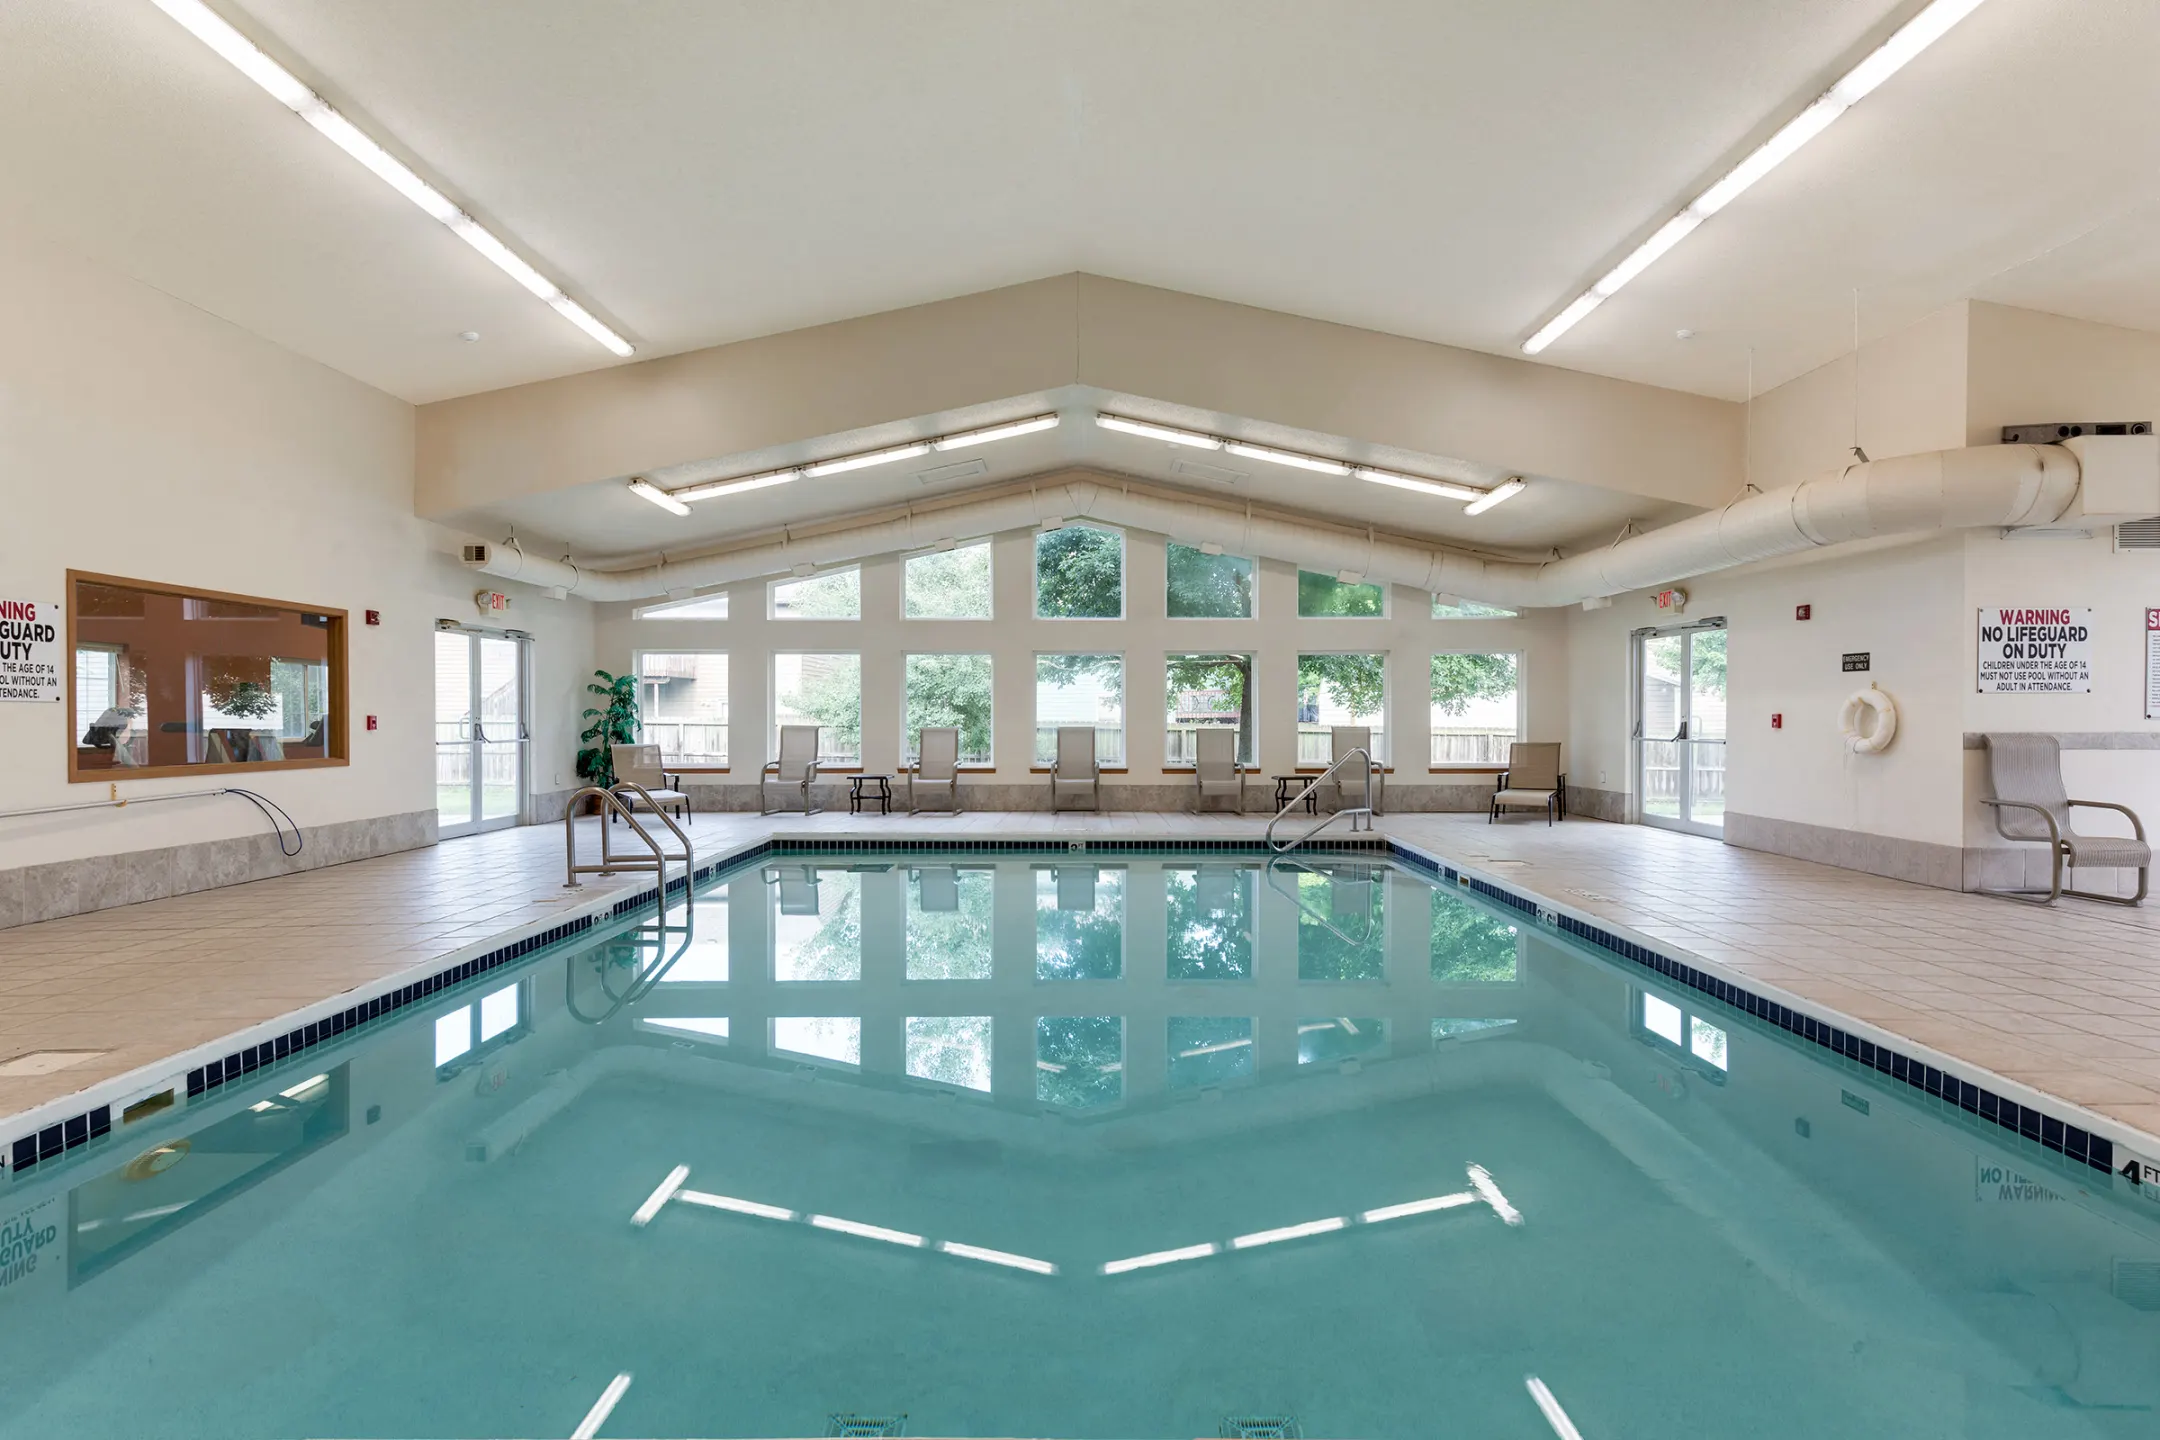 Pool - Platinum Valley Apartments - Sioux Falls, SD